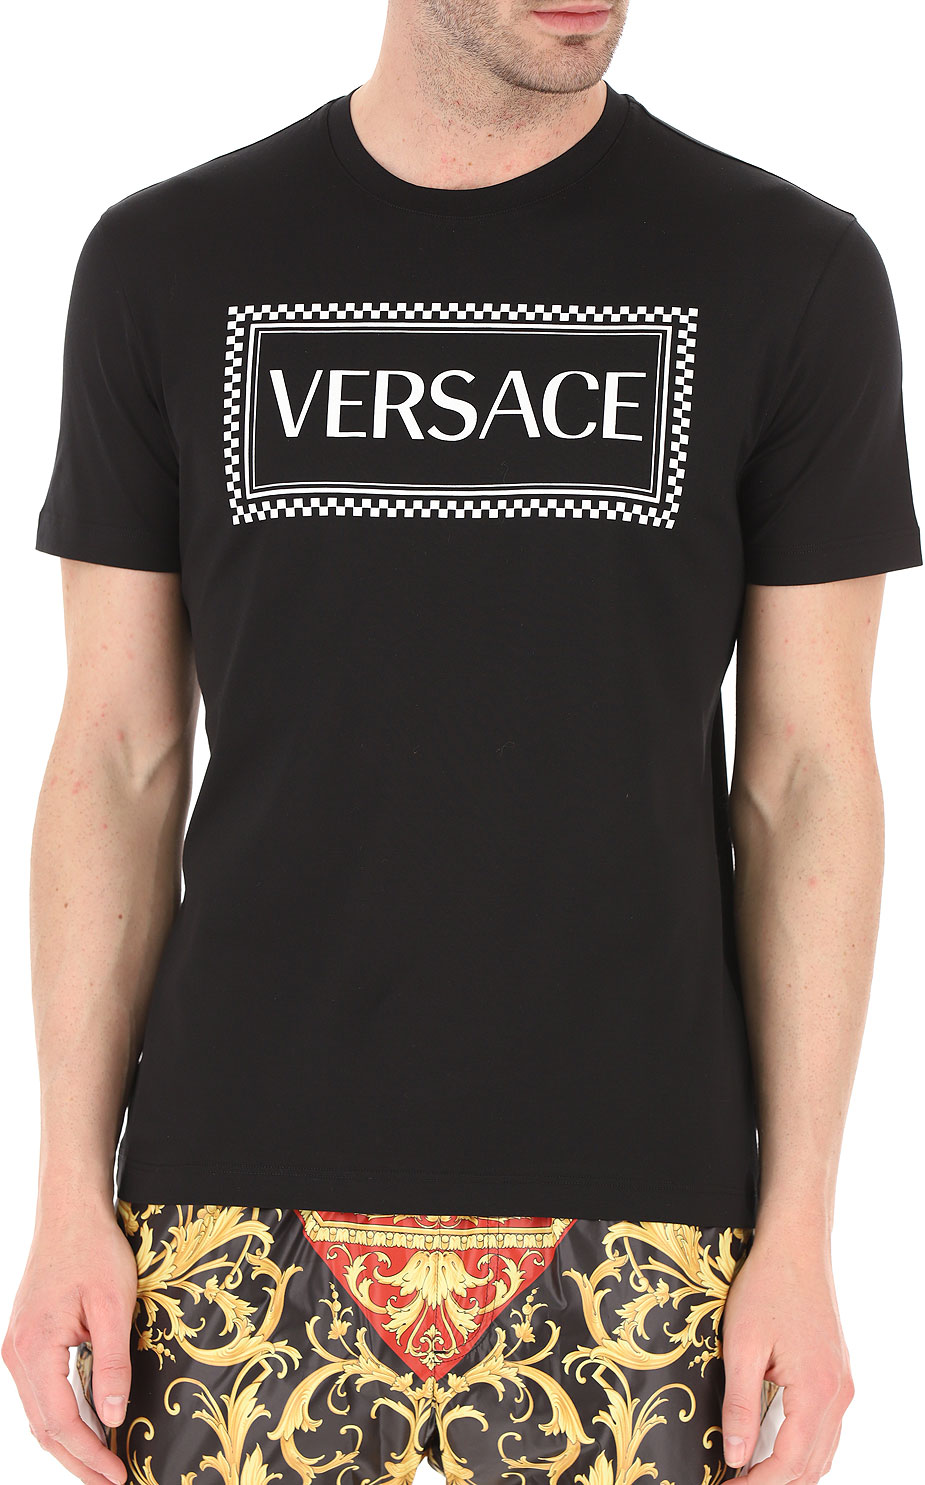 Mens Clothing Versace, Style code: a81548-a201952-a008